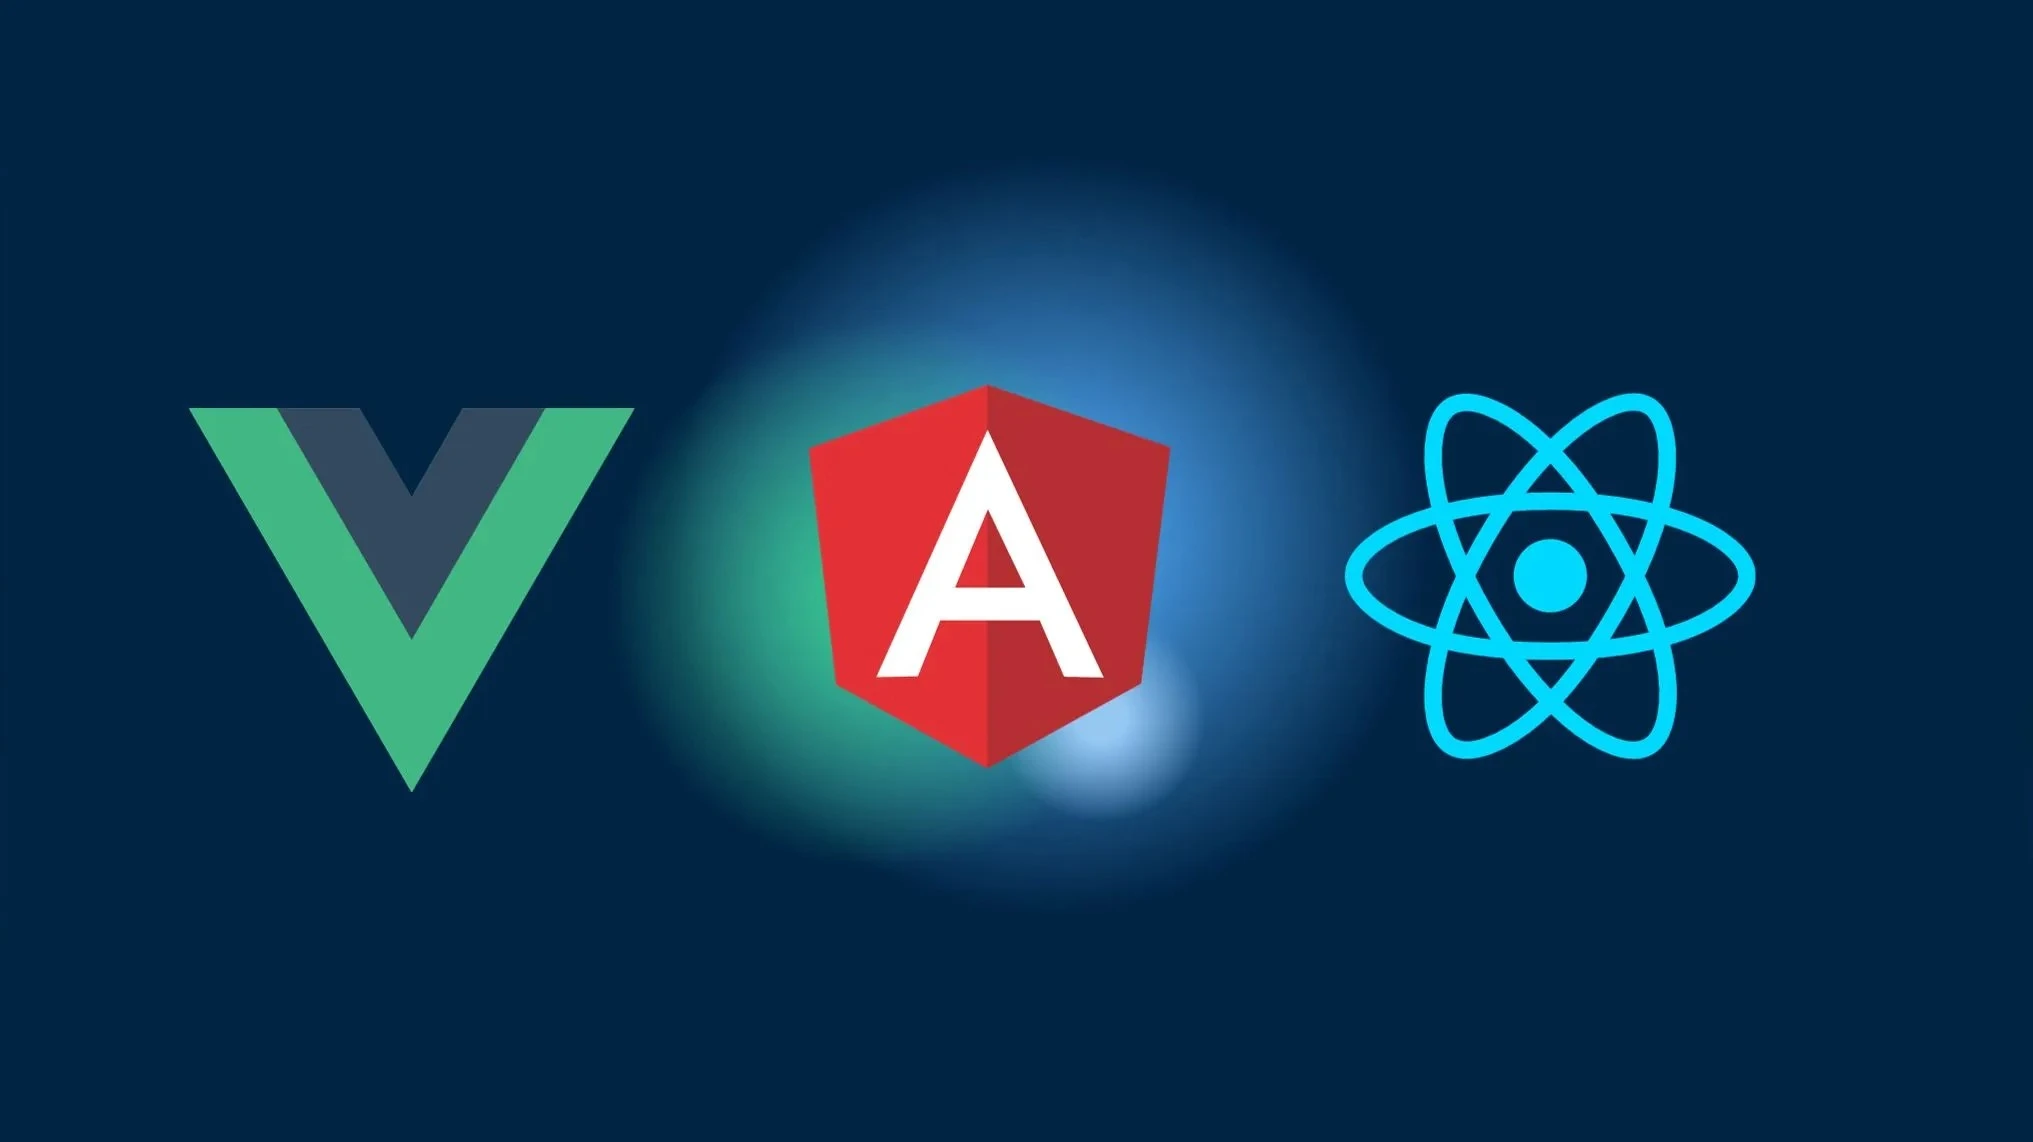 blog illustration How to Create an Offline Screen in Vue, Angular, and React Applications using the Network API and Capacitor